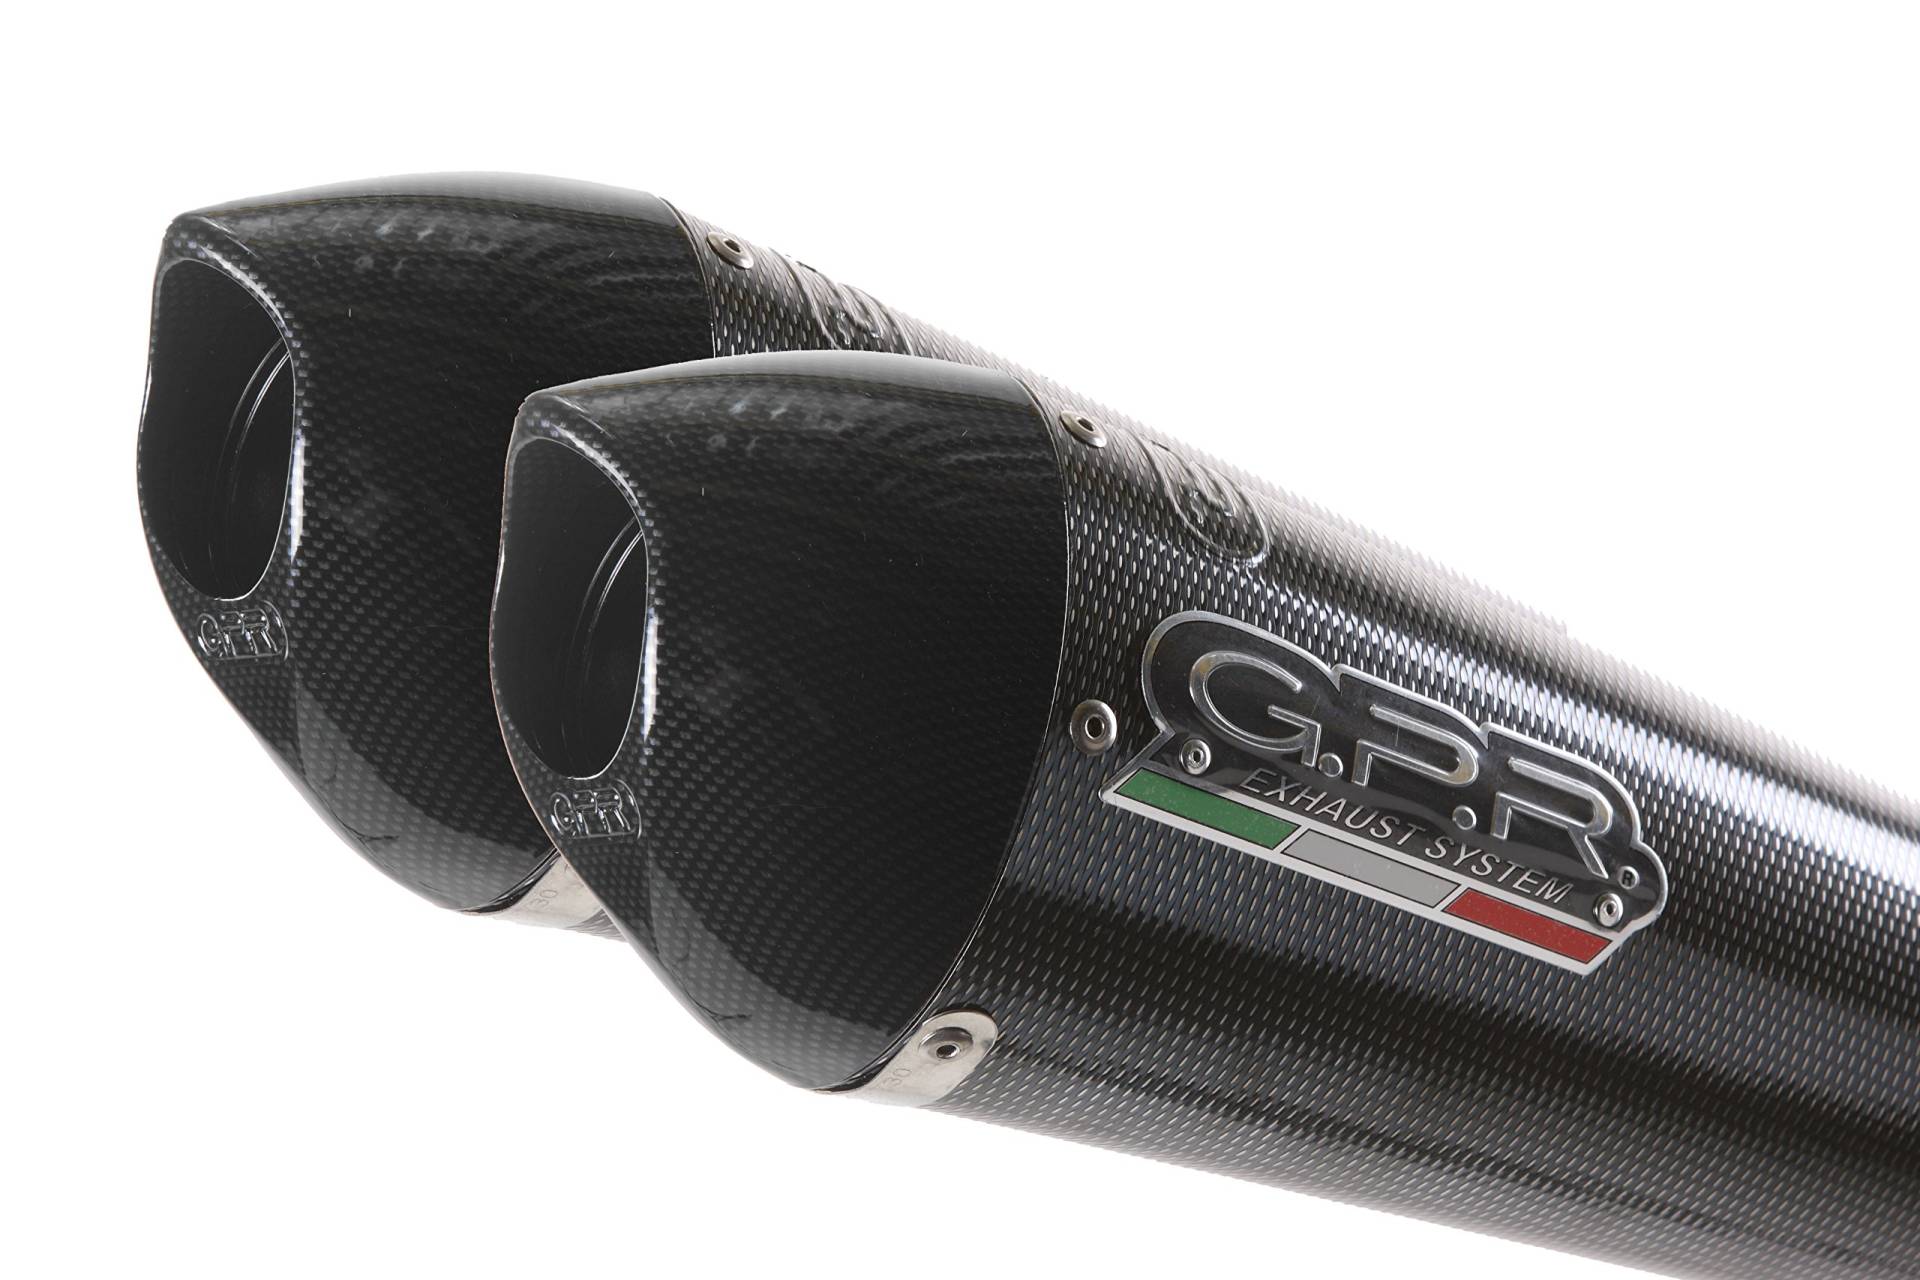 GPR Auspuff Endkappe – Ducati Supersport 620 S 2003/04 Dual HOMOLOGATED Slip Exhaust System High Level by GPR Exhaust Systems der EVO Poppy Line von GPR EXHAUST SYSTEM